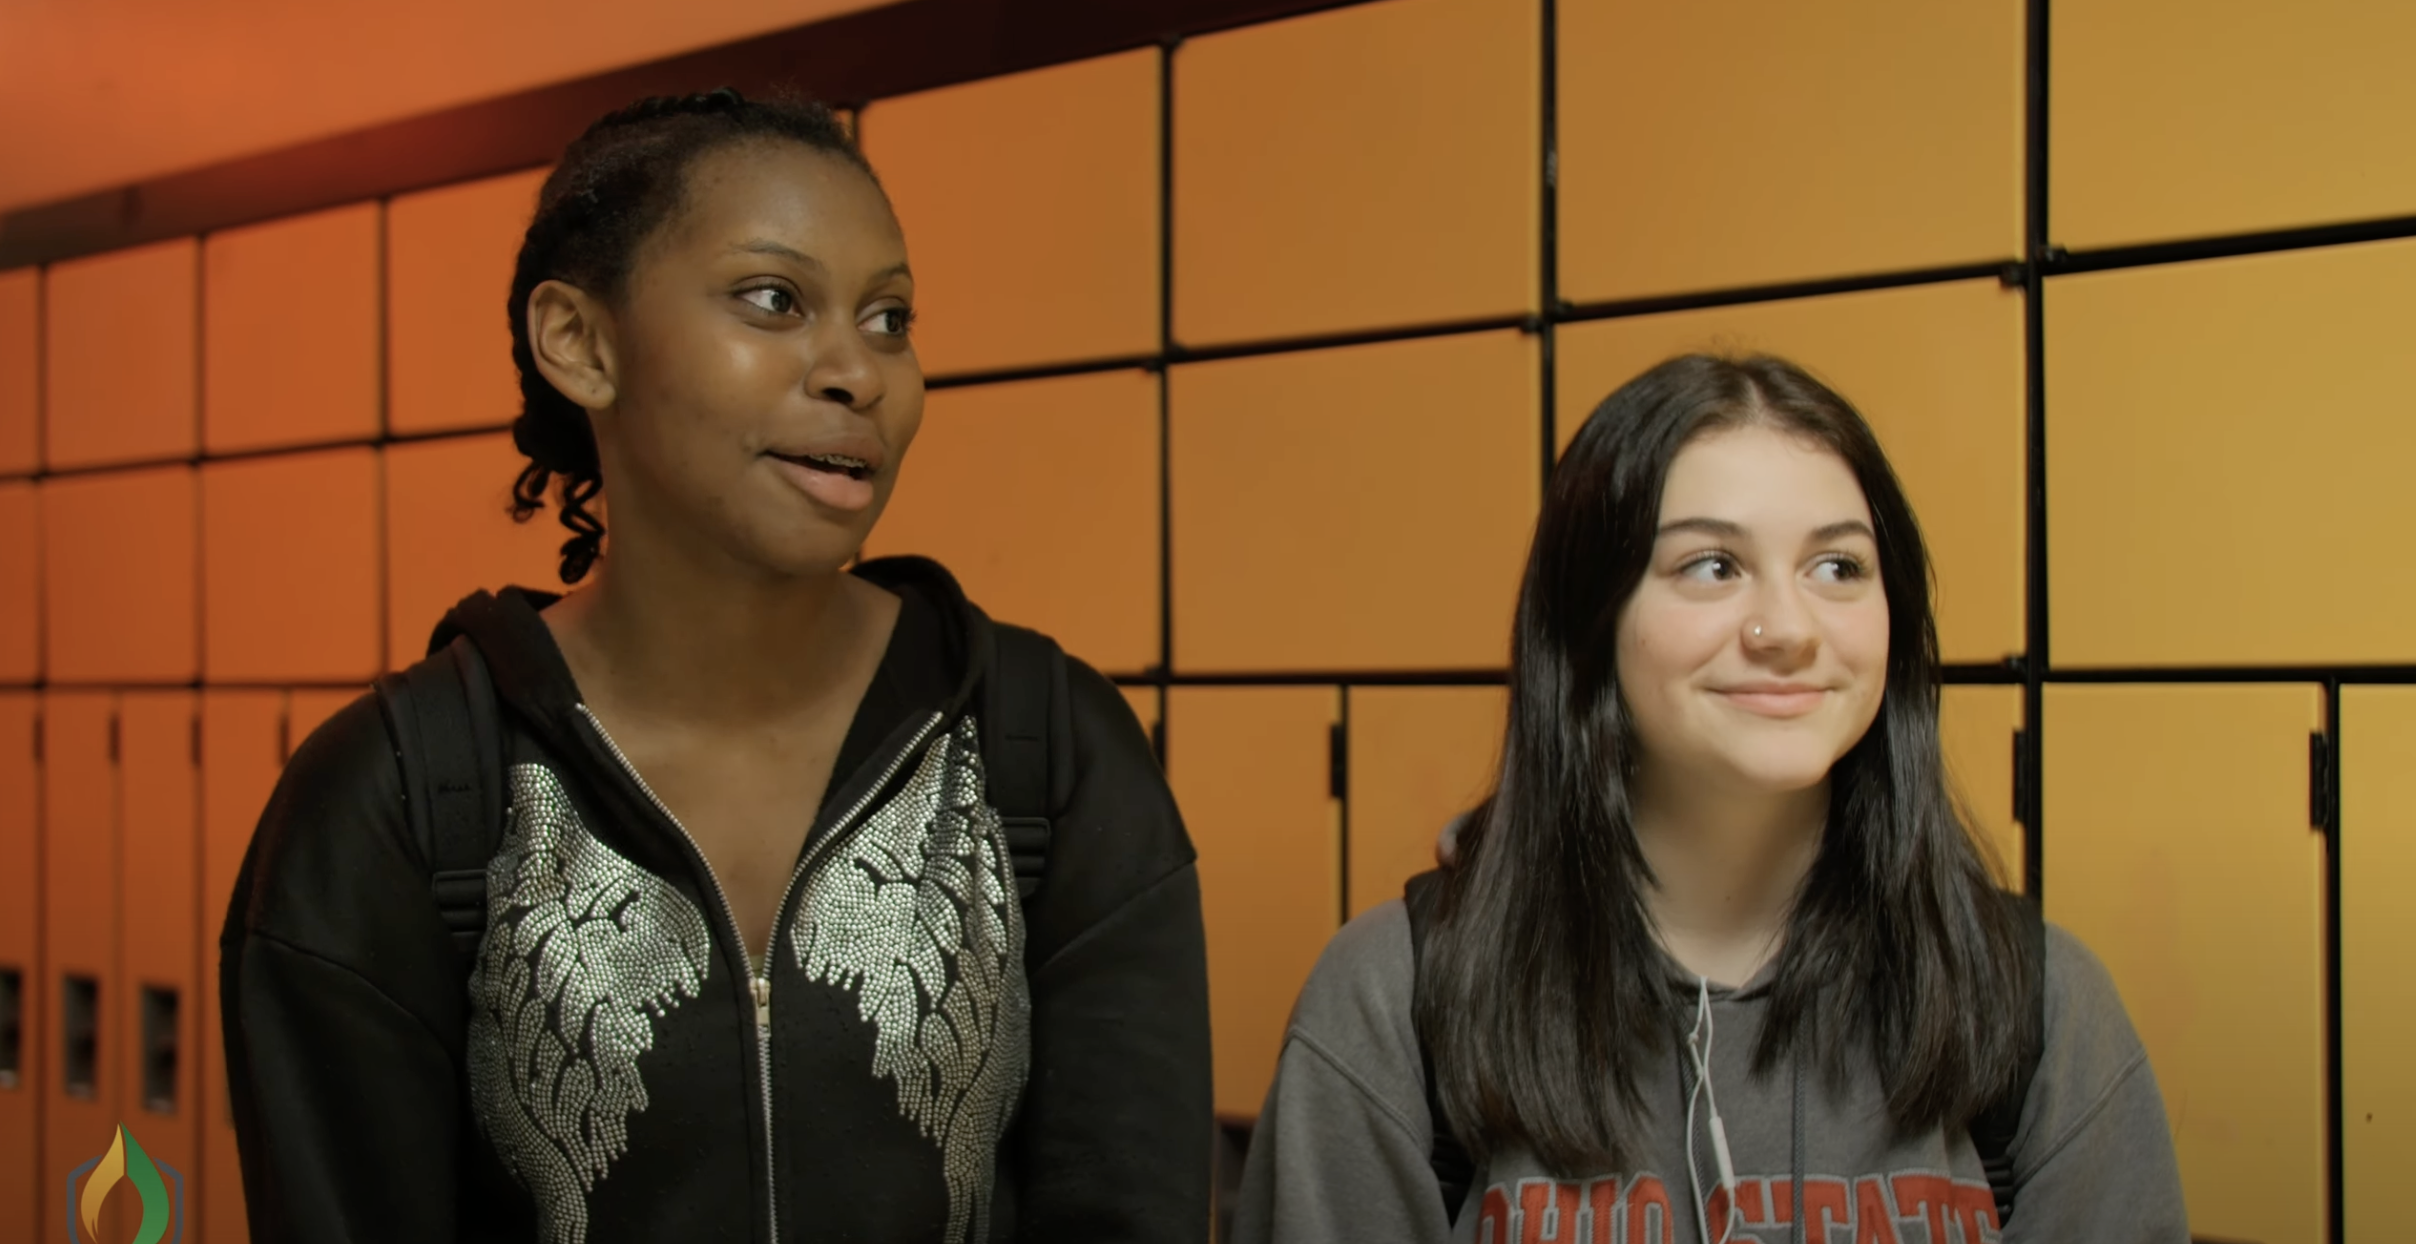 Video Shows Student/Staff Perspective on LHS Bond